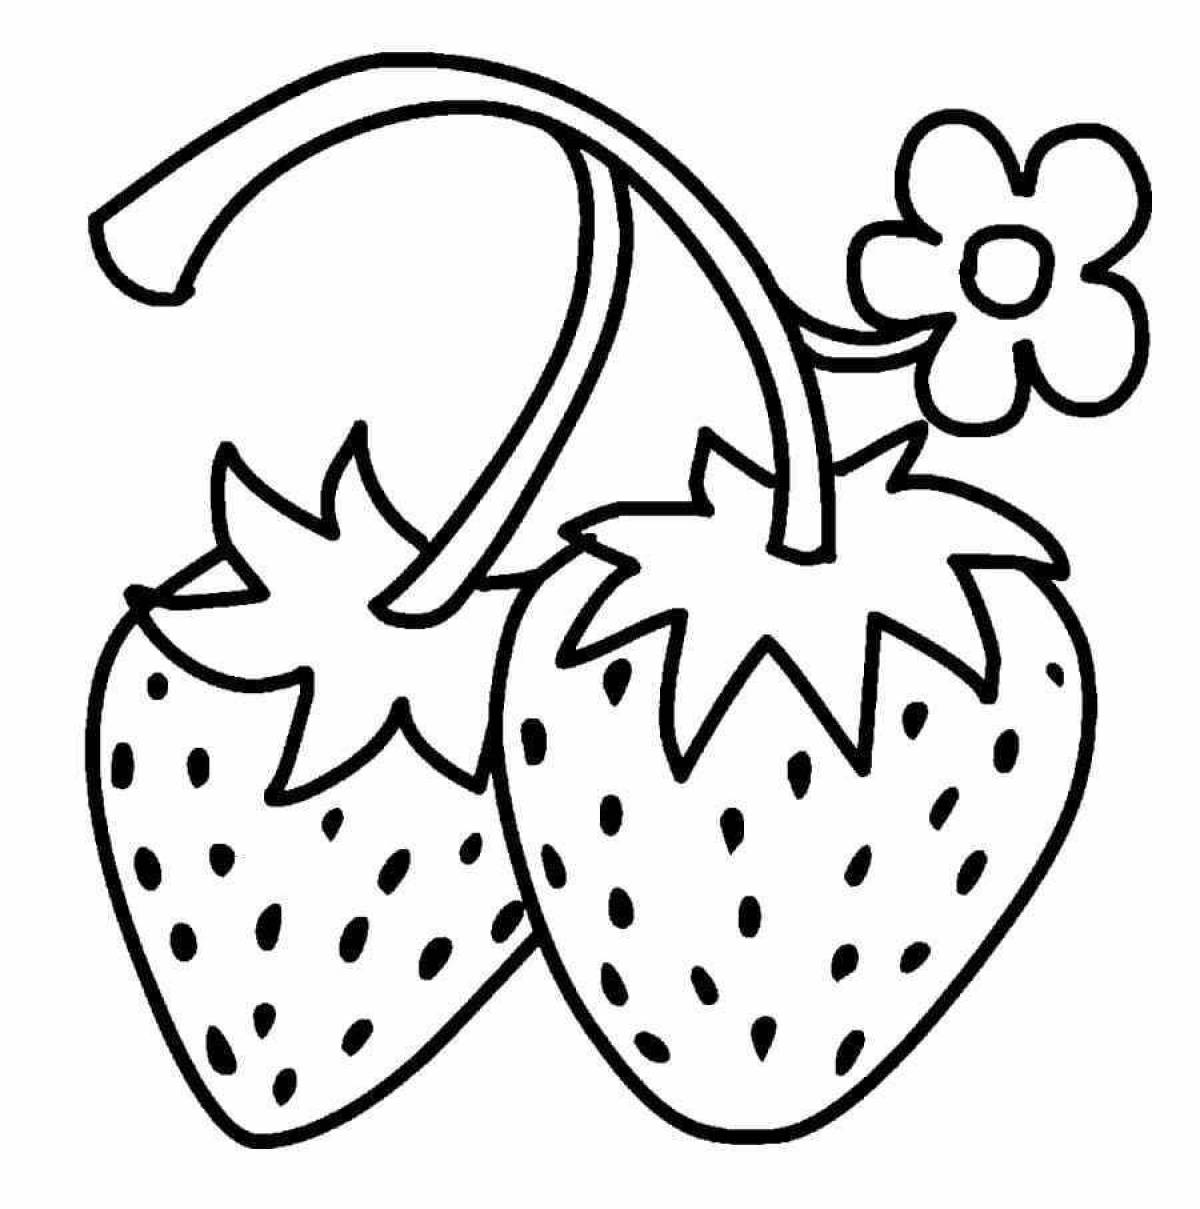 Strawberry holiday coloring book